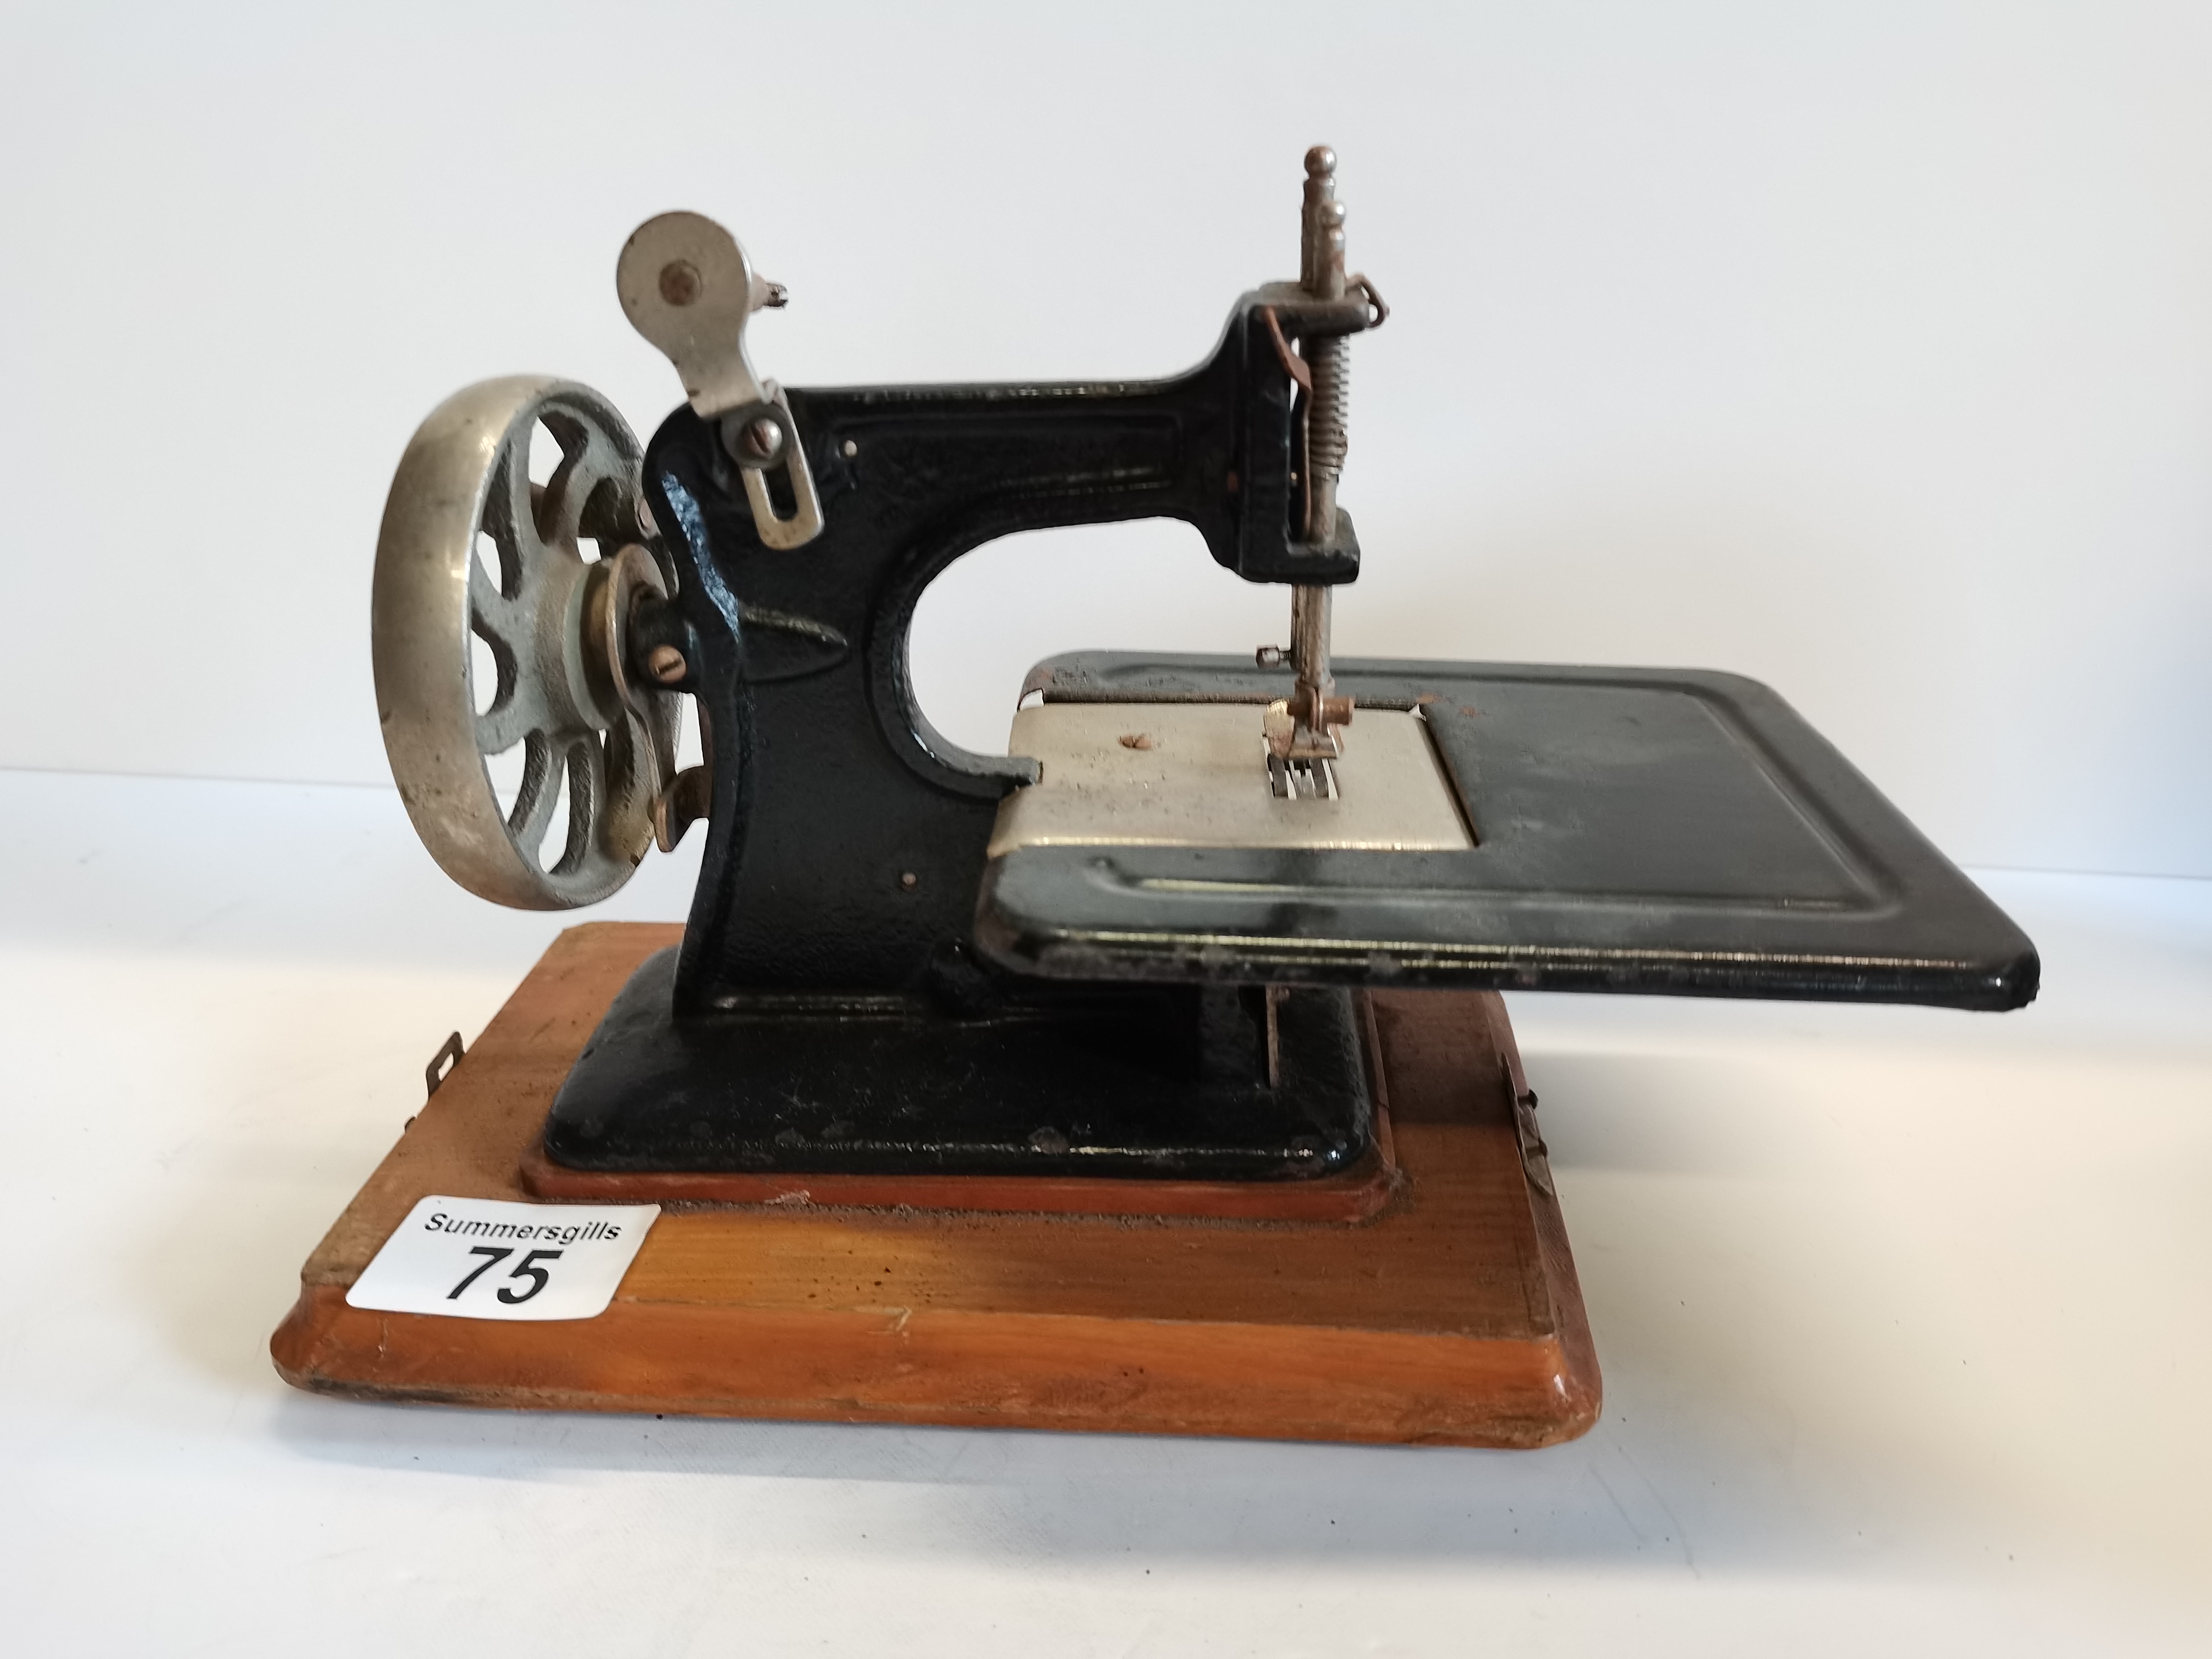 Small Childs Sewing Machine By Federation - Image 2 of 3